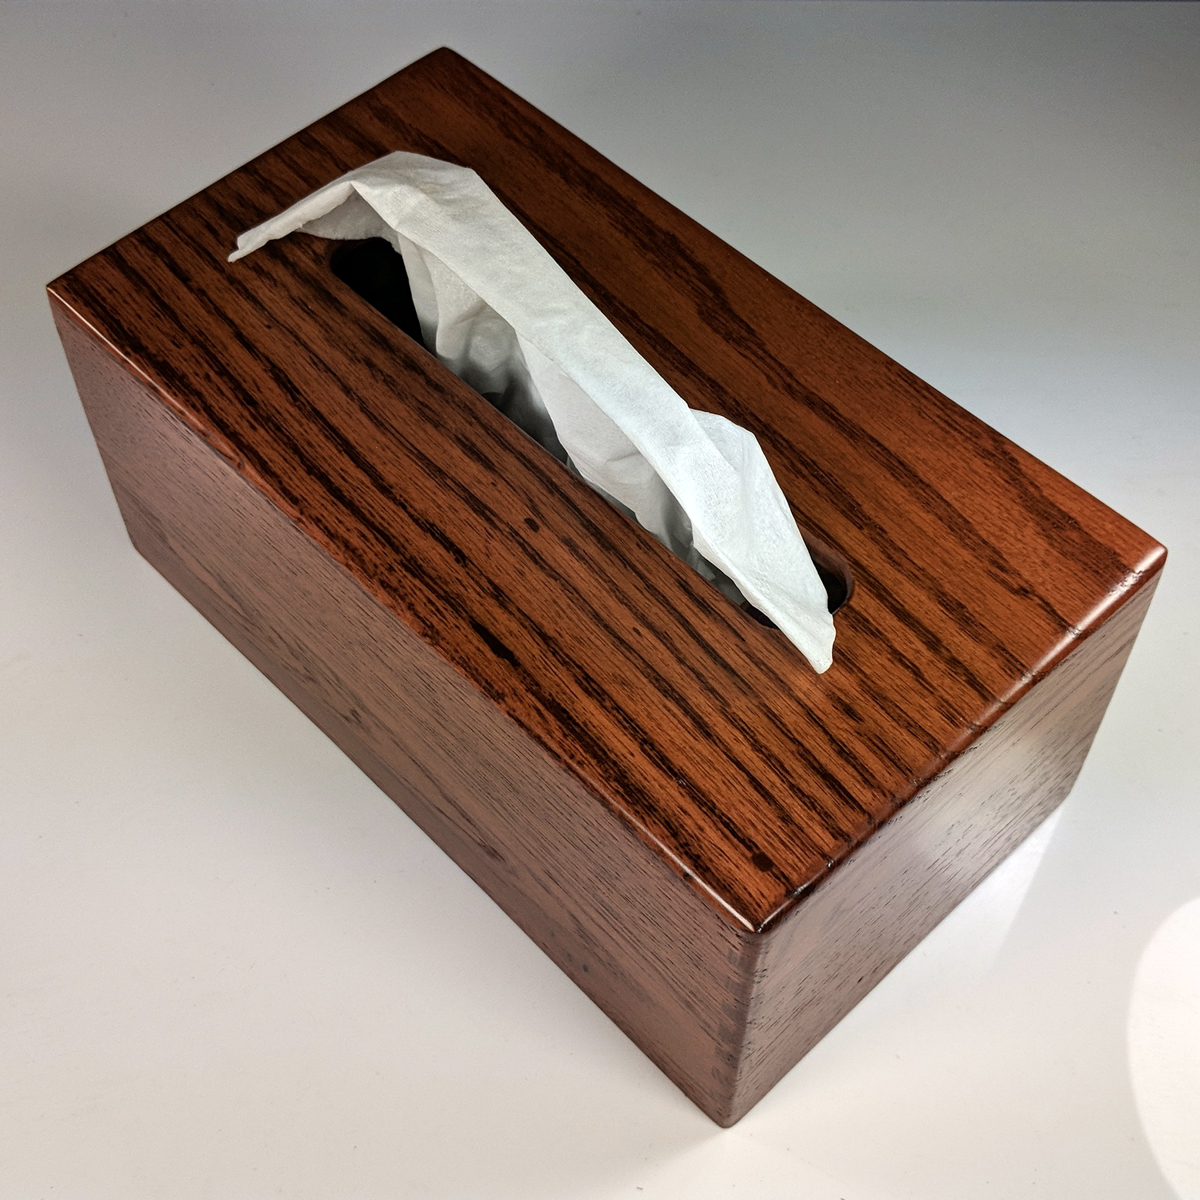 red tissue box cover